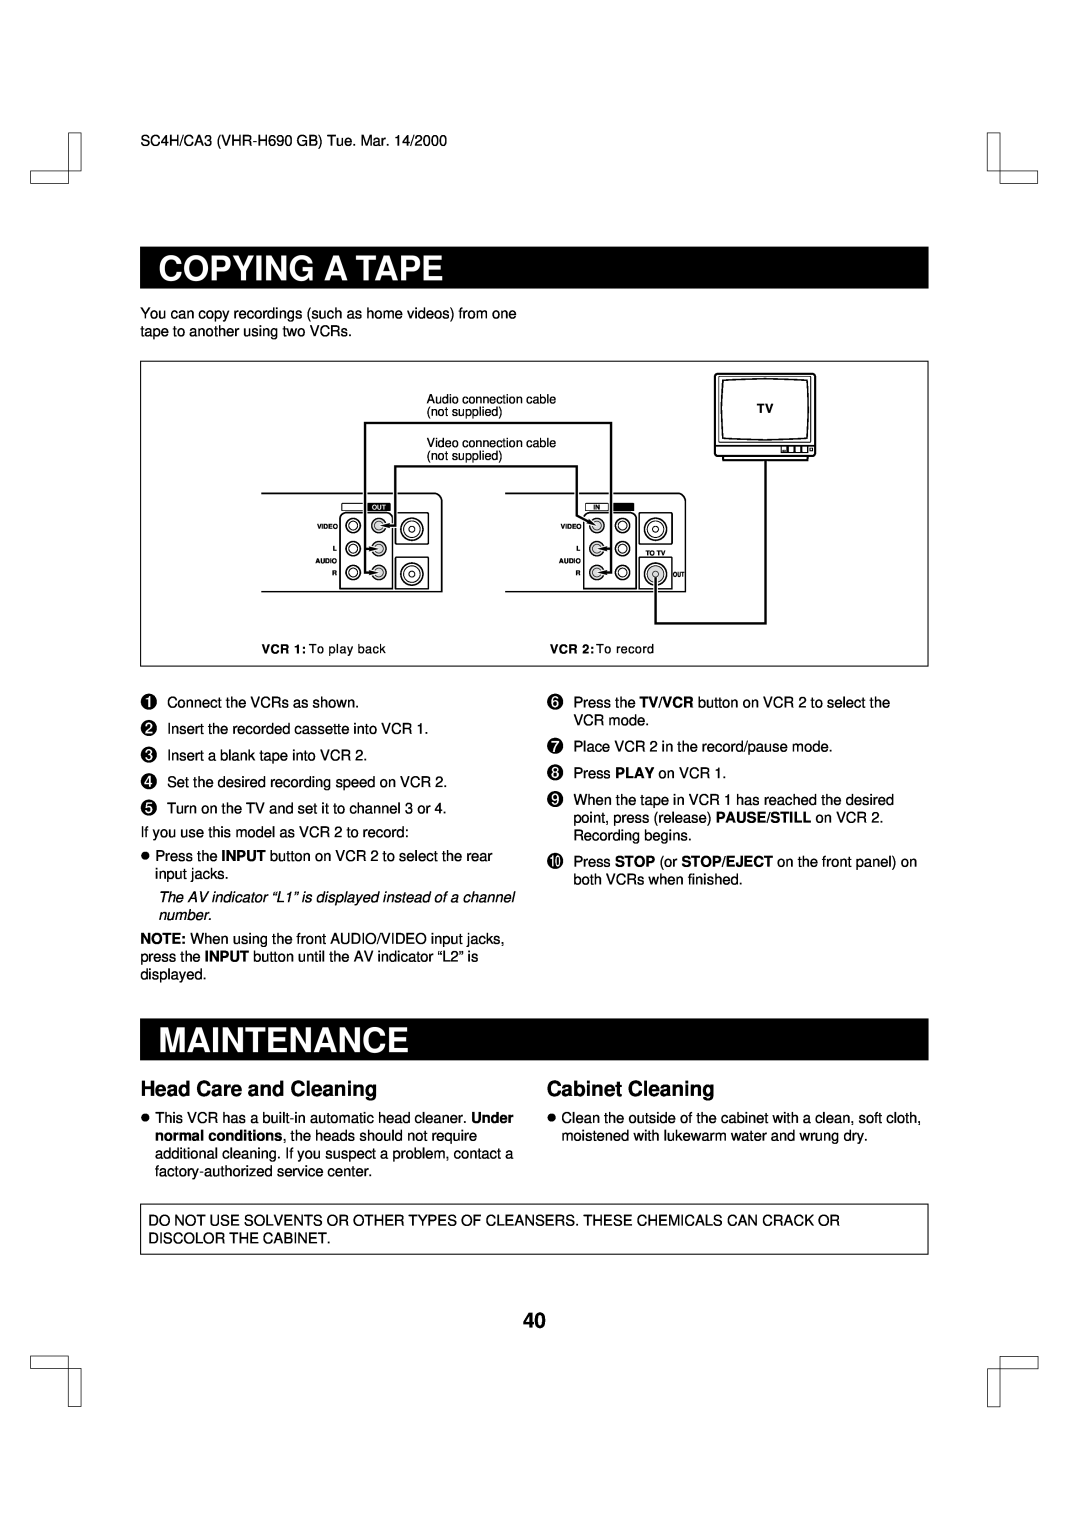 Sanyo VHR-H690 instruction manual Copying A Tape, Maintenance, Head Care and Cleaning, Cabinet Cleaning 